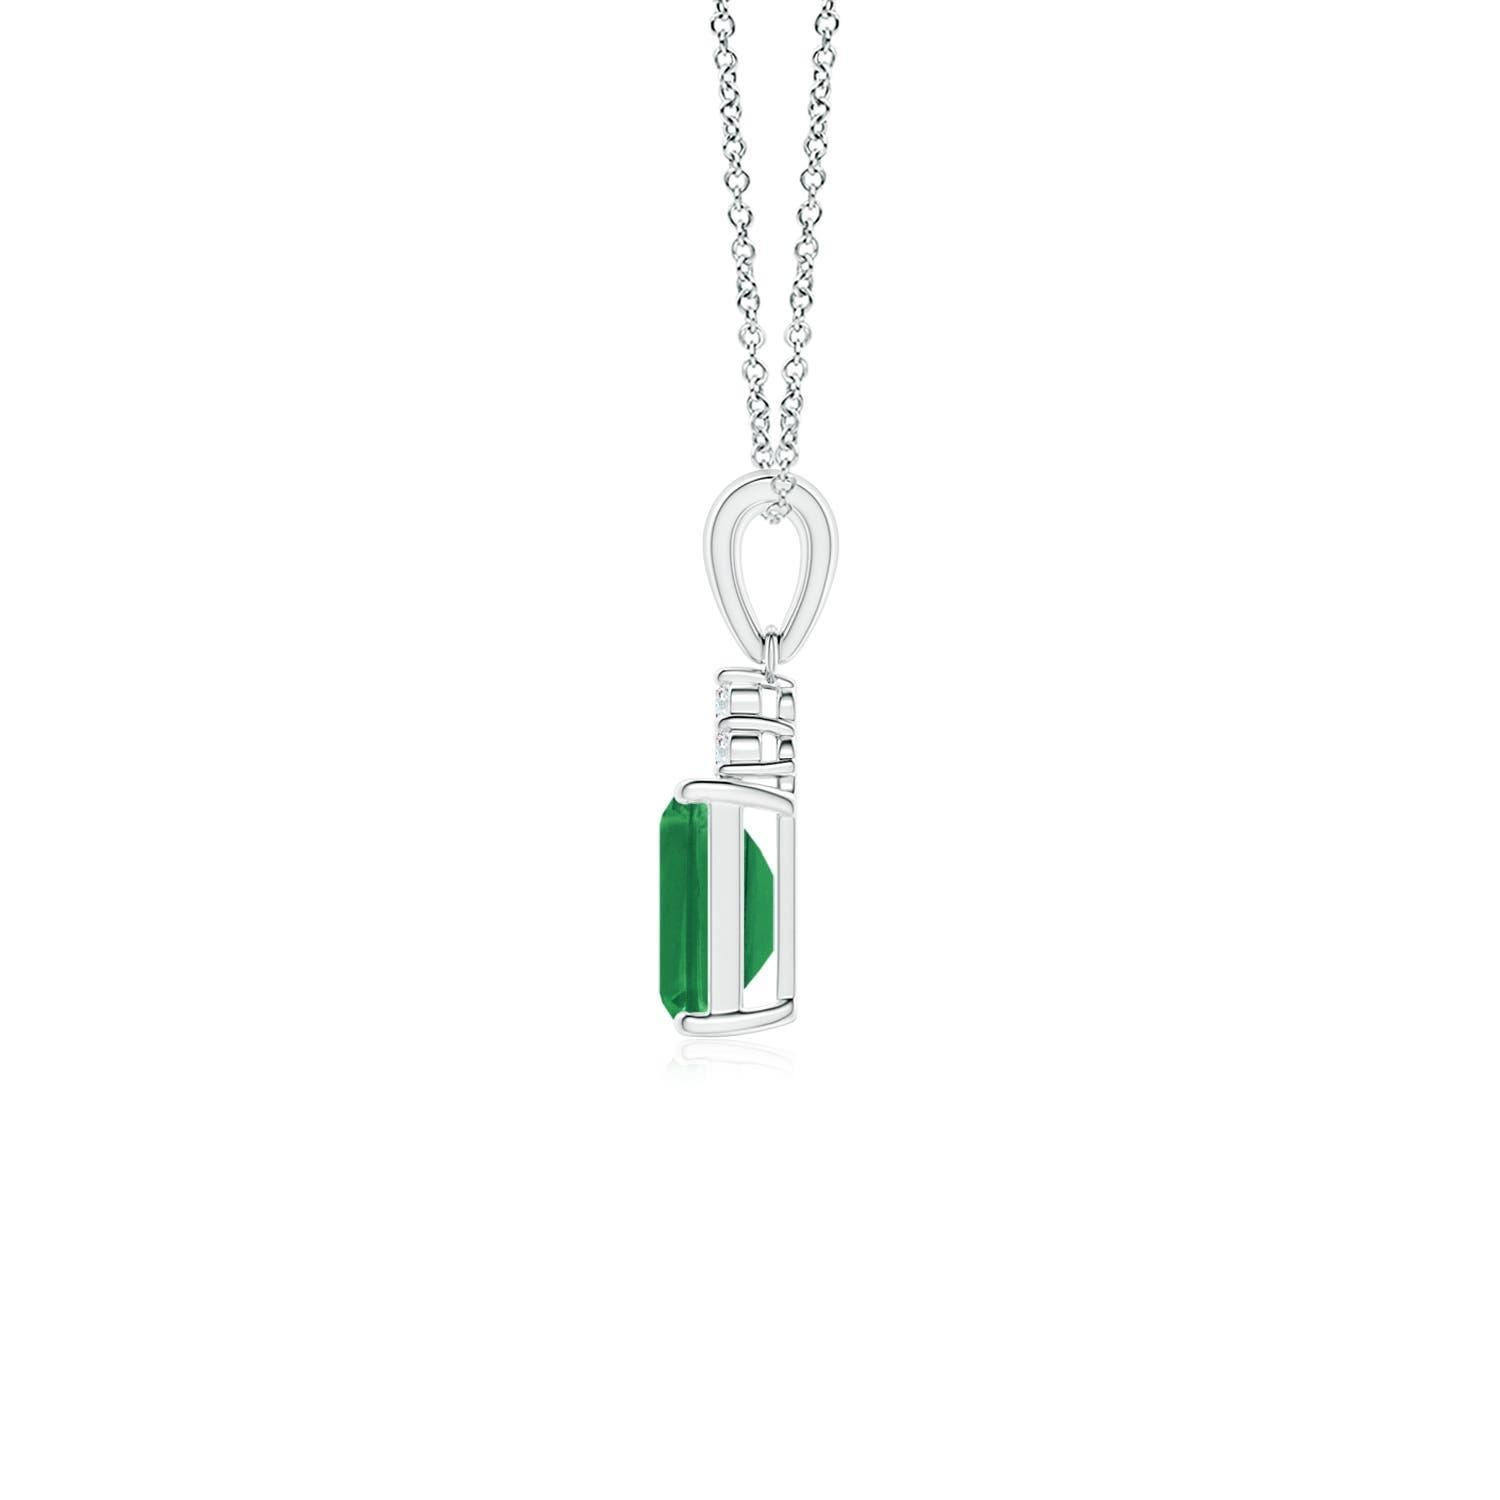 A stunning emerald-cut emerald sits pretty in a four-prong setting, topped by a glimmering cluster of diamonds. The rich green gemstone is enhanced by the brilliance of the sparkling white diamonds. This exquisite emerald dangle pendant is an